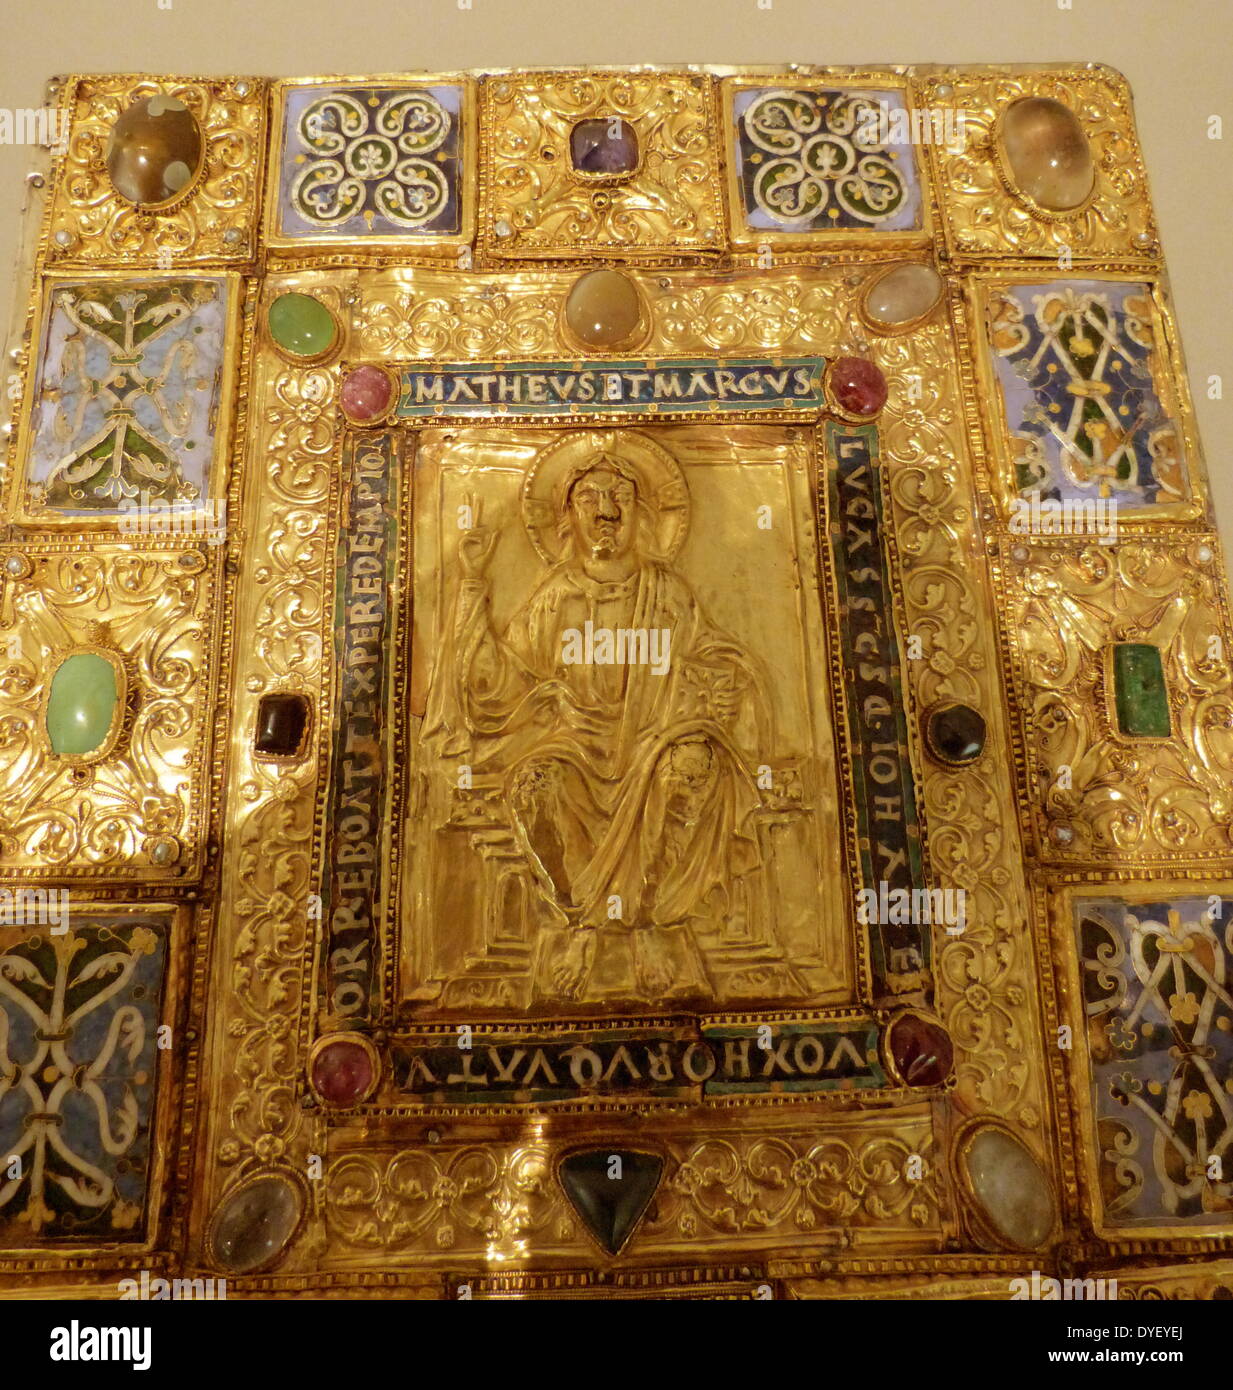 Bejewelled religious plaque with relief image and Latin Inscription. Stock Photo